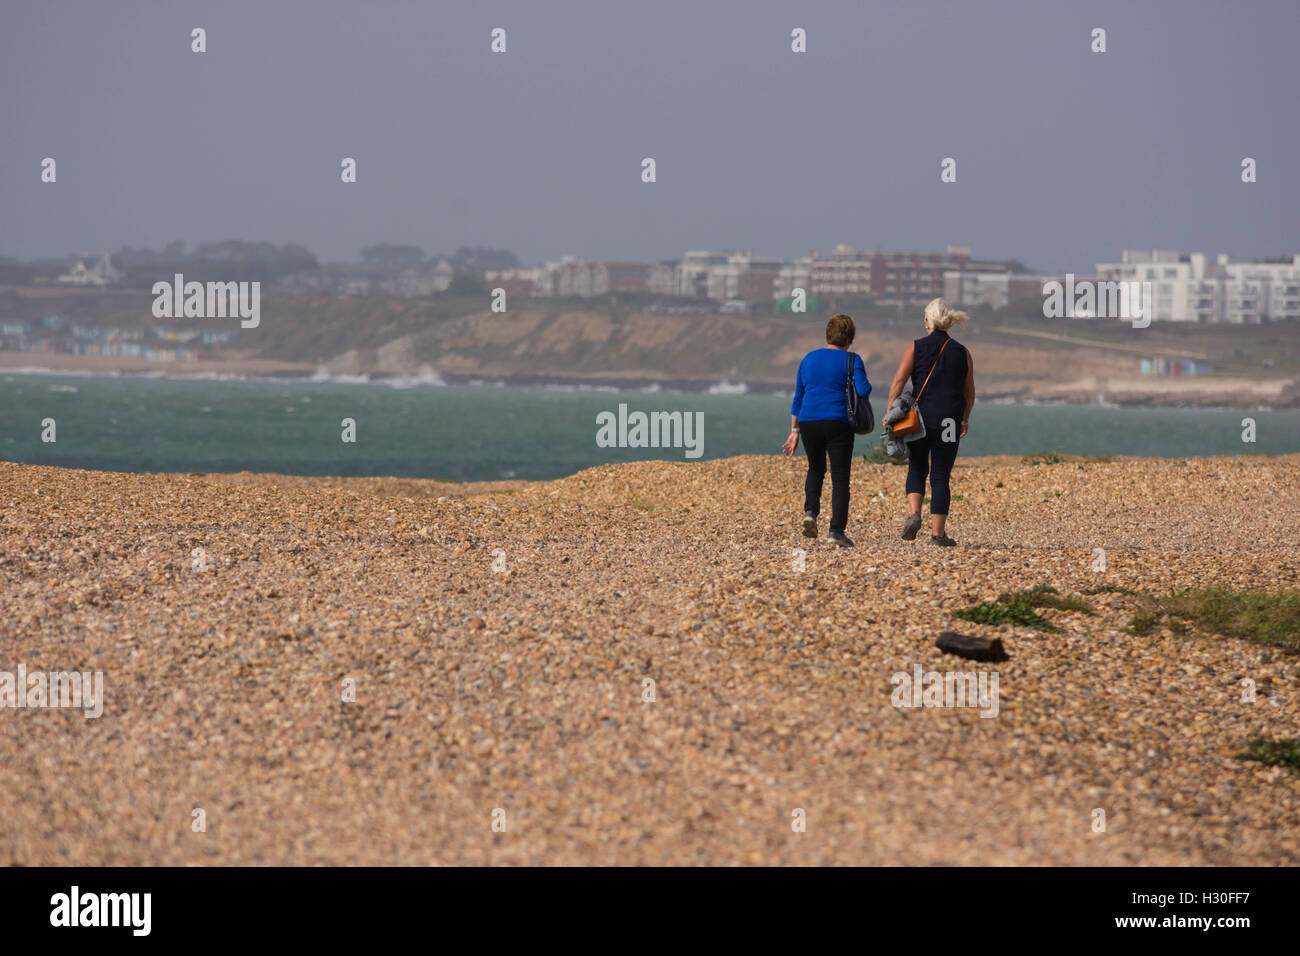 Two elderly women walking together on a beach. Stock Photo